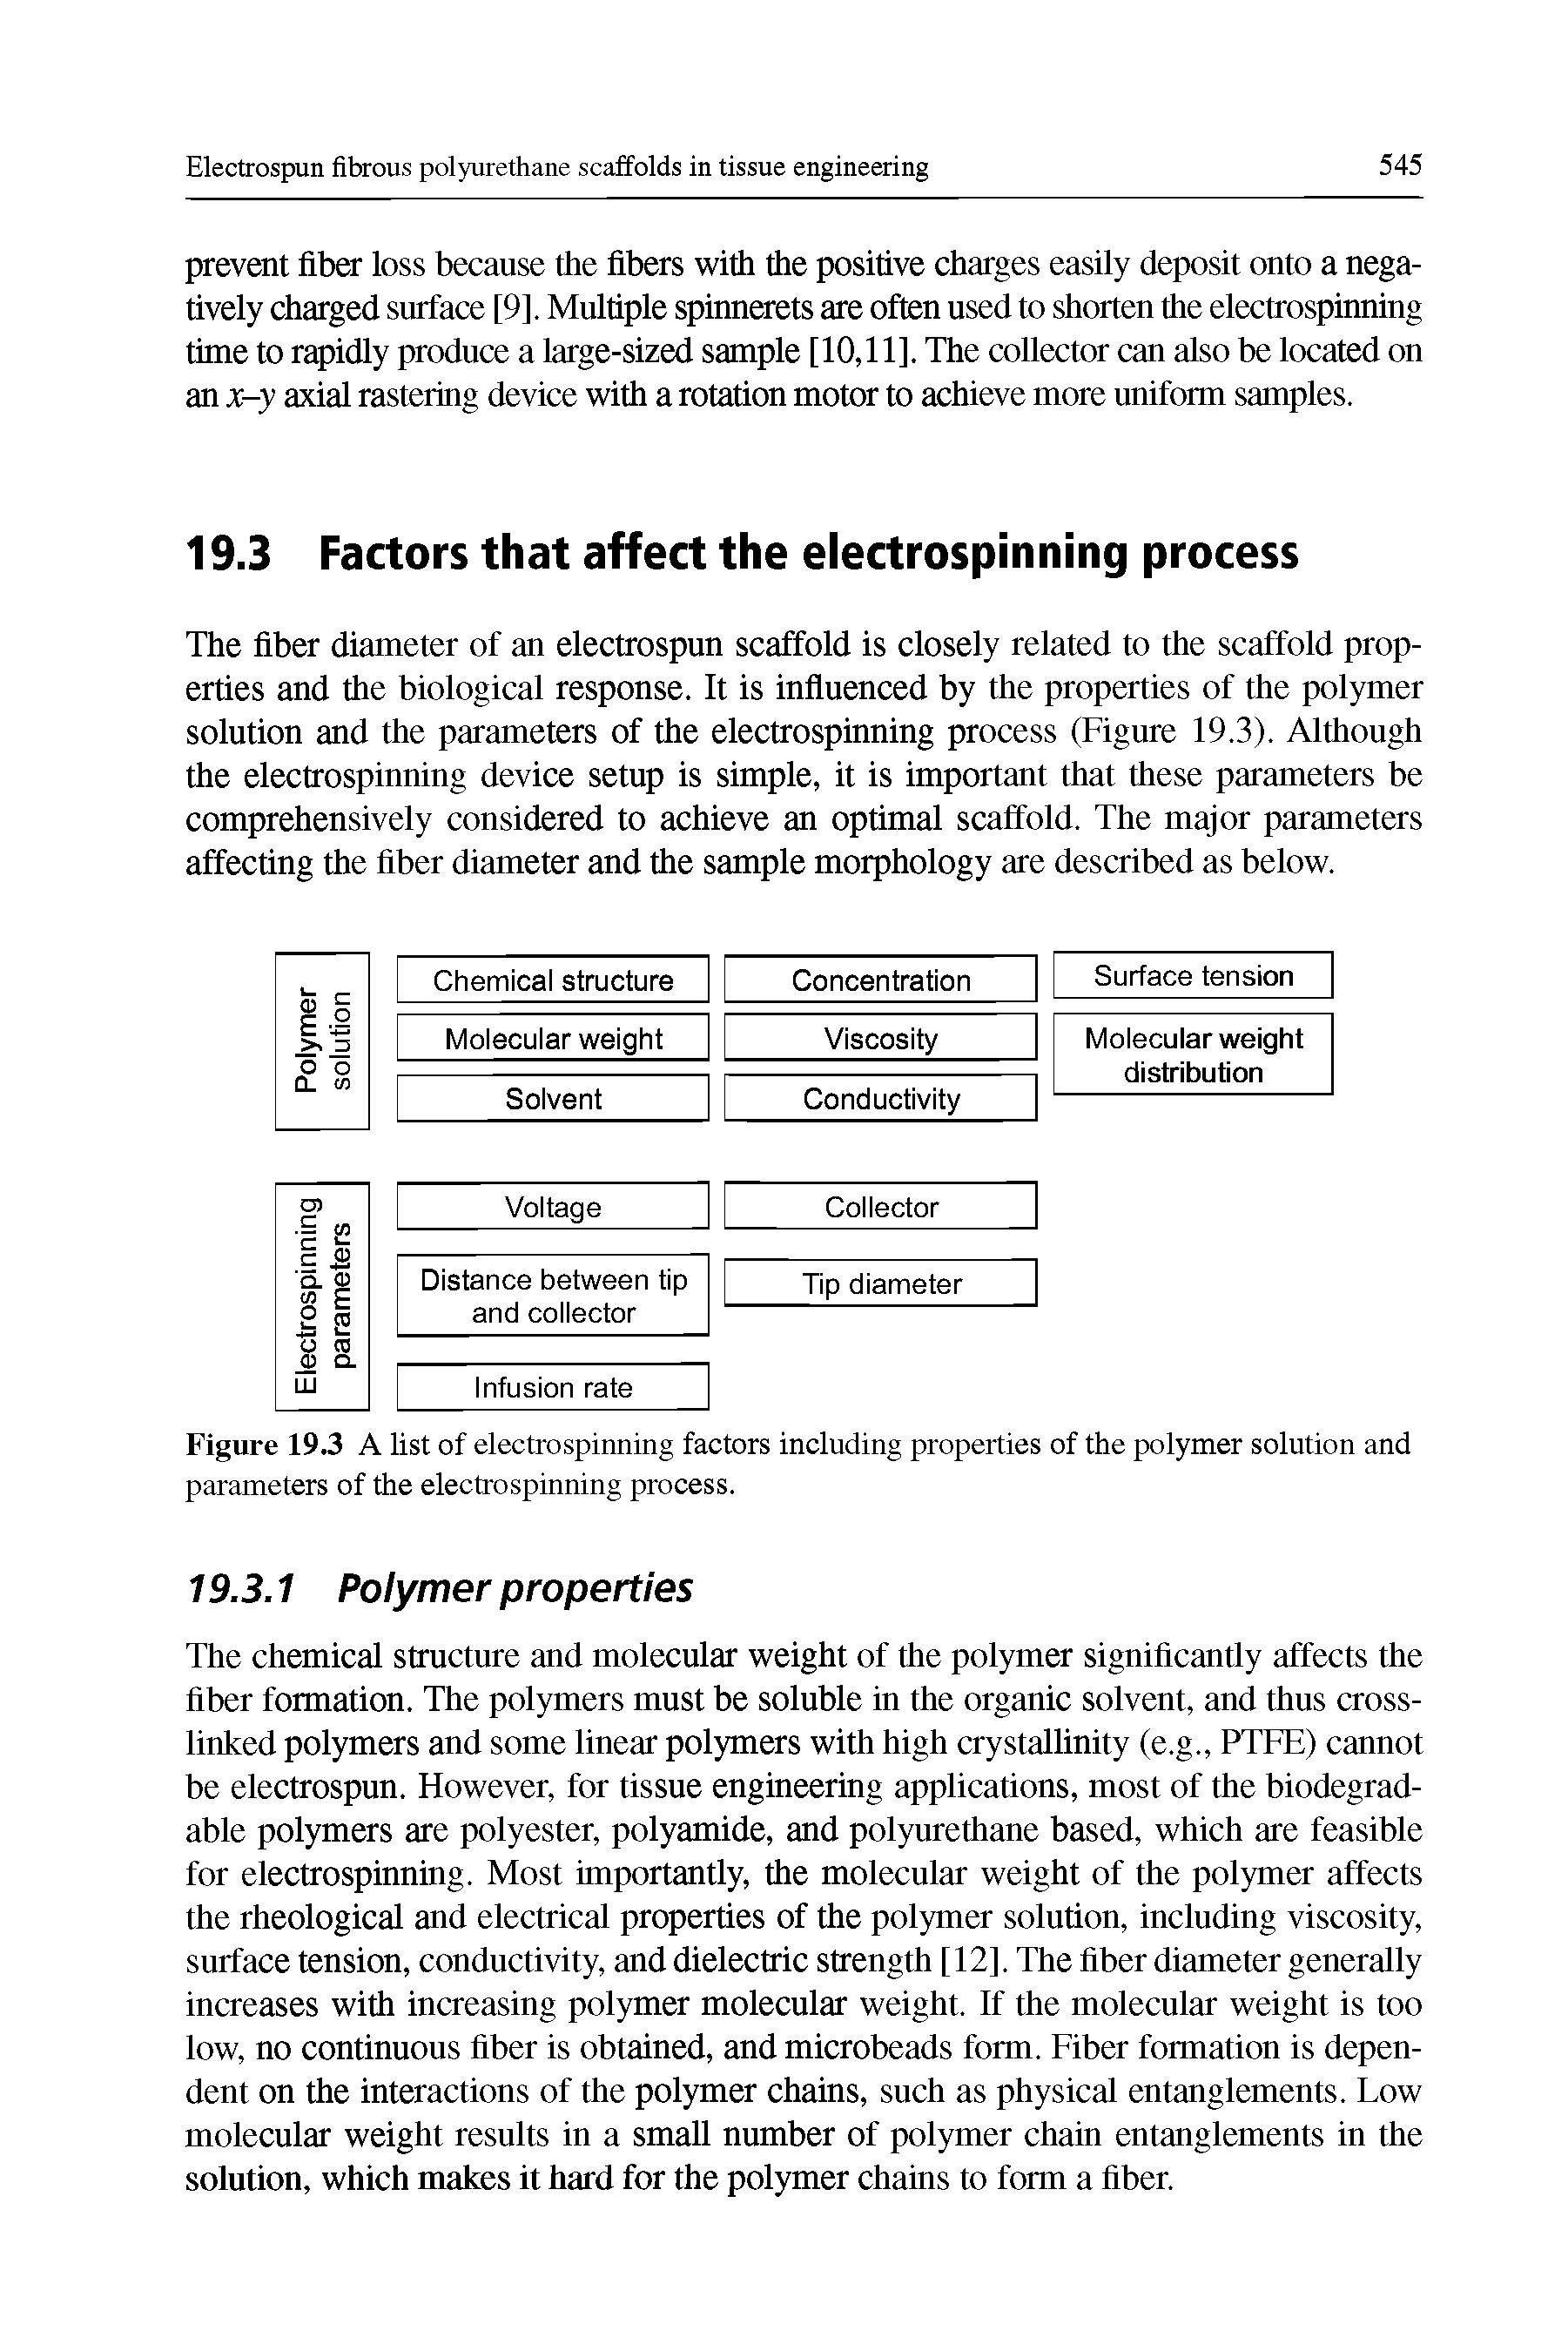 Figure 19.3 A list of electro spinning factors including properties of the polymer solution and parameters of the electro spinning process.